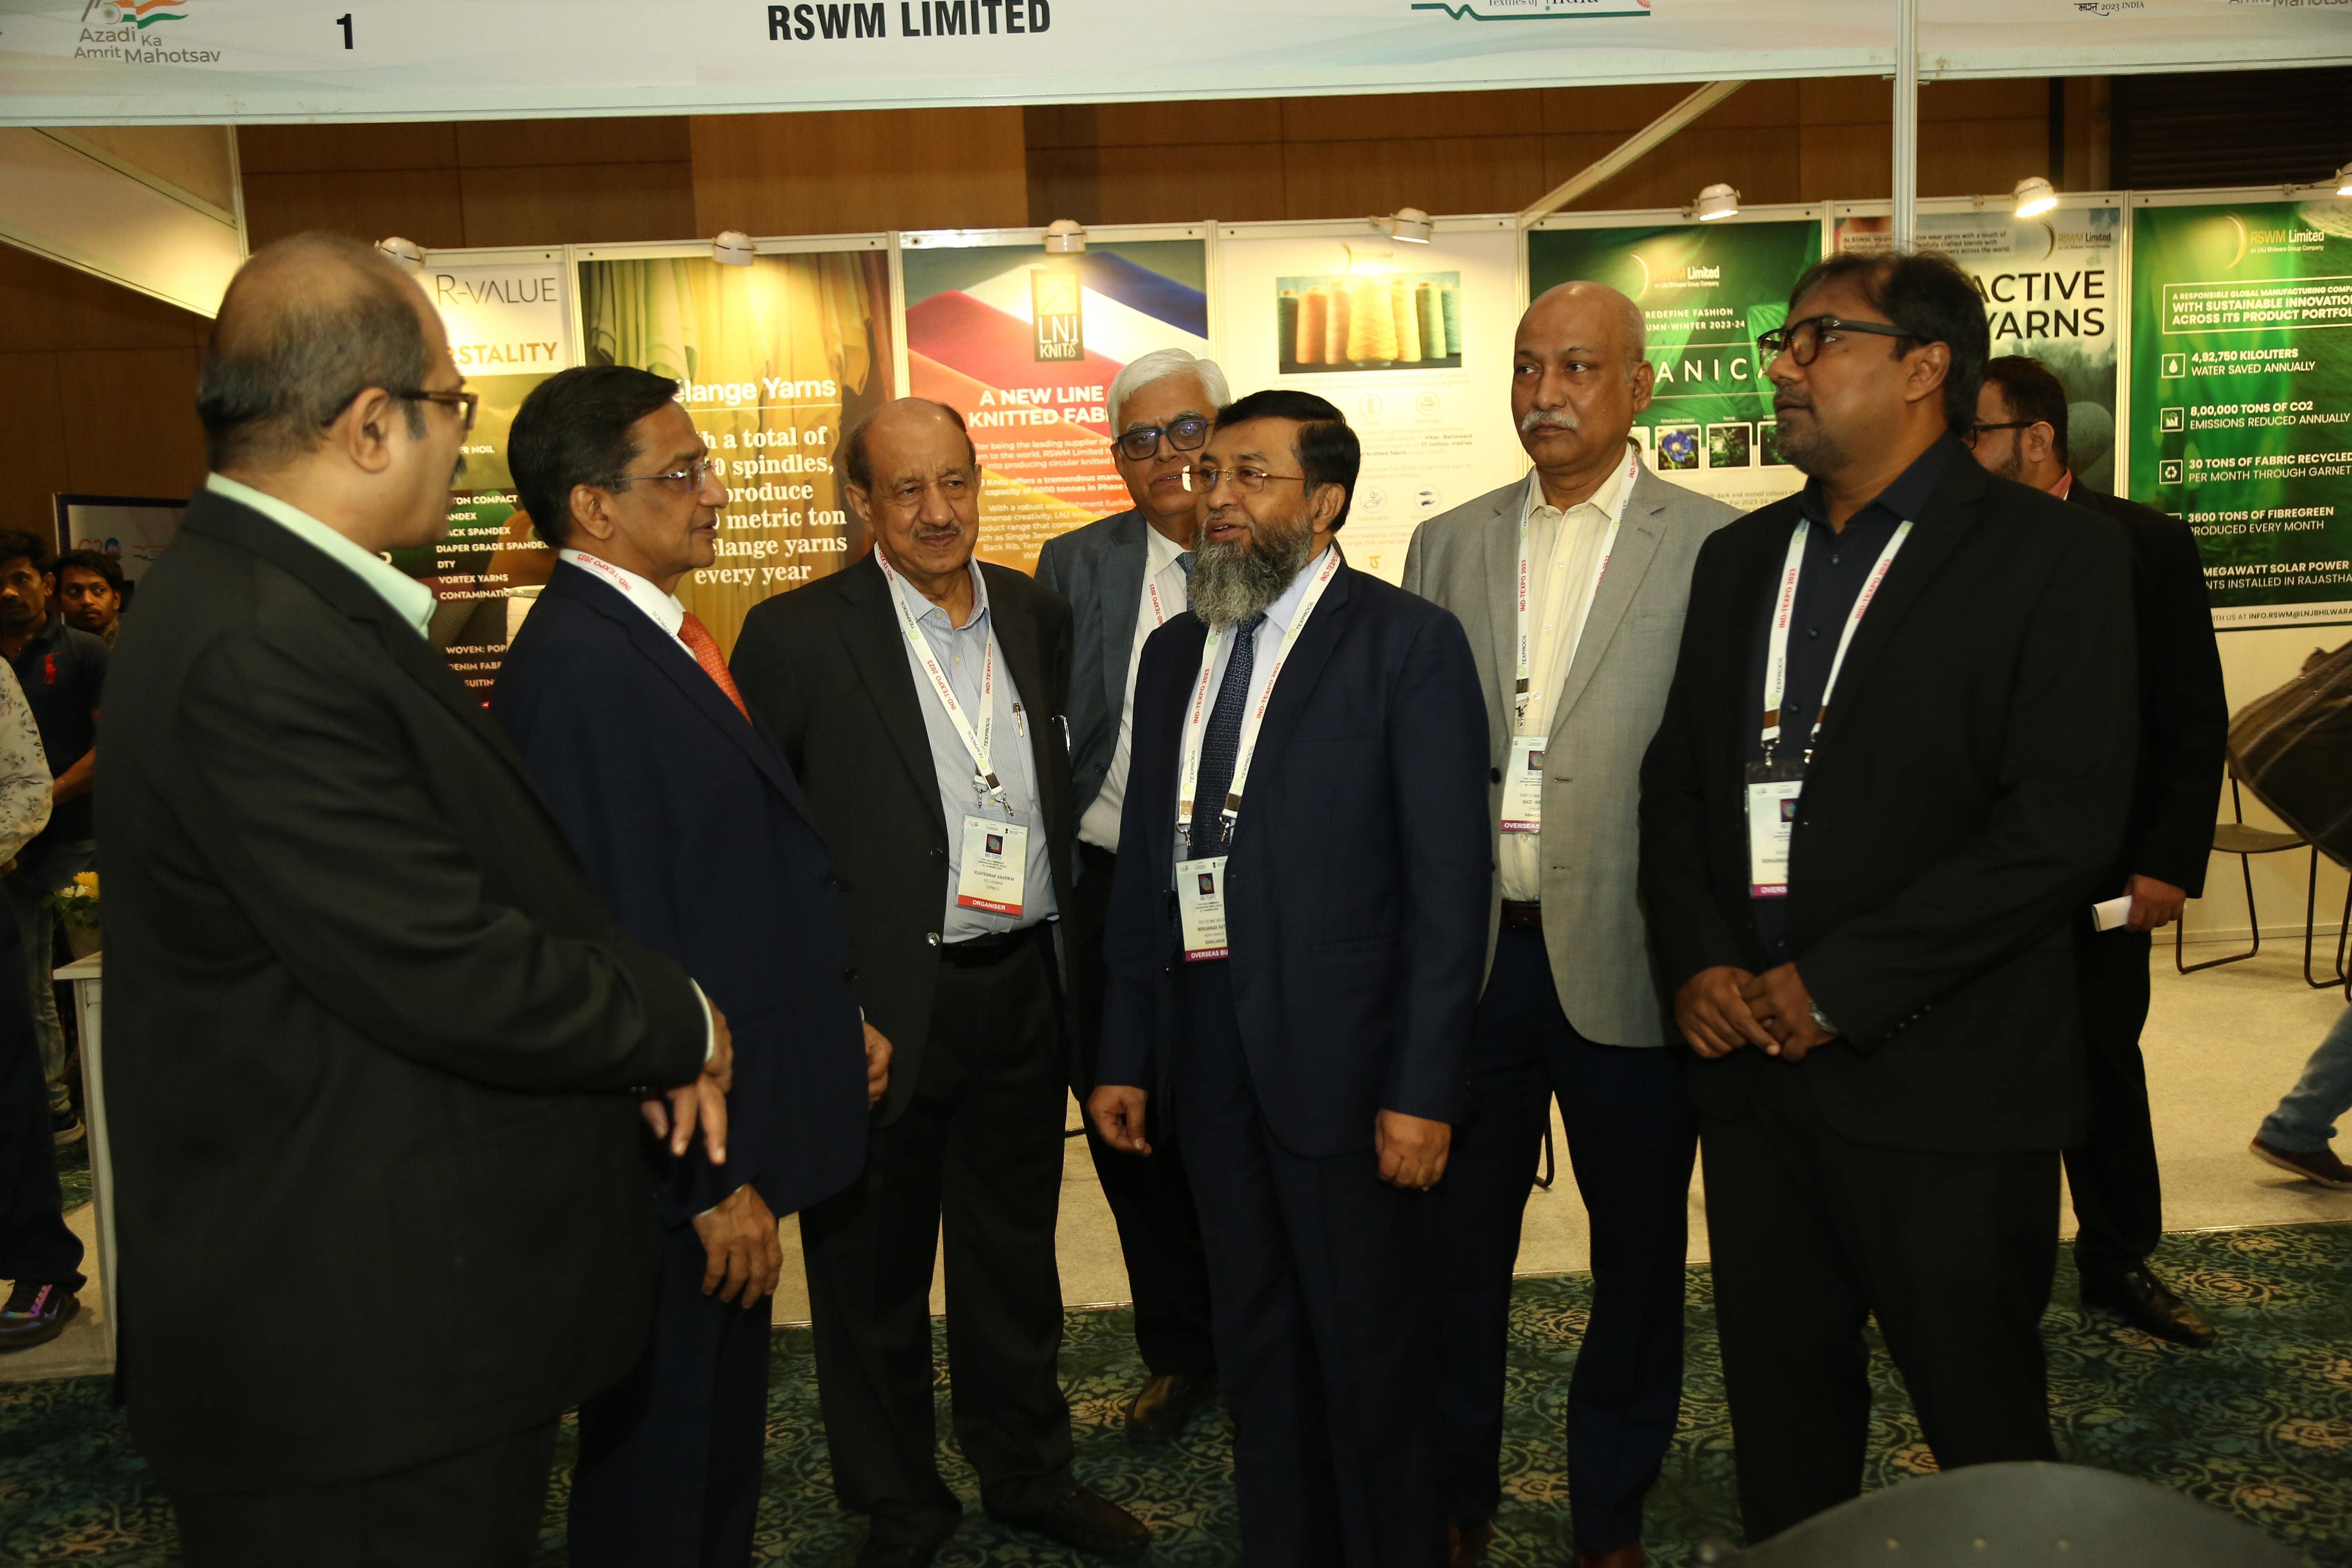 IND-TEXPO 2023 at Leela Ambience Convention Hotel, New Delhi from March 22-23, 2023